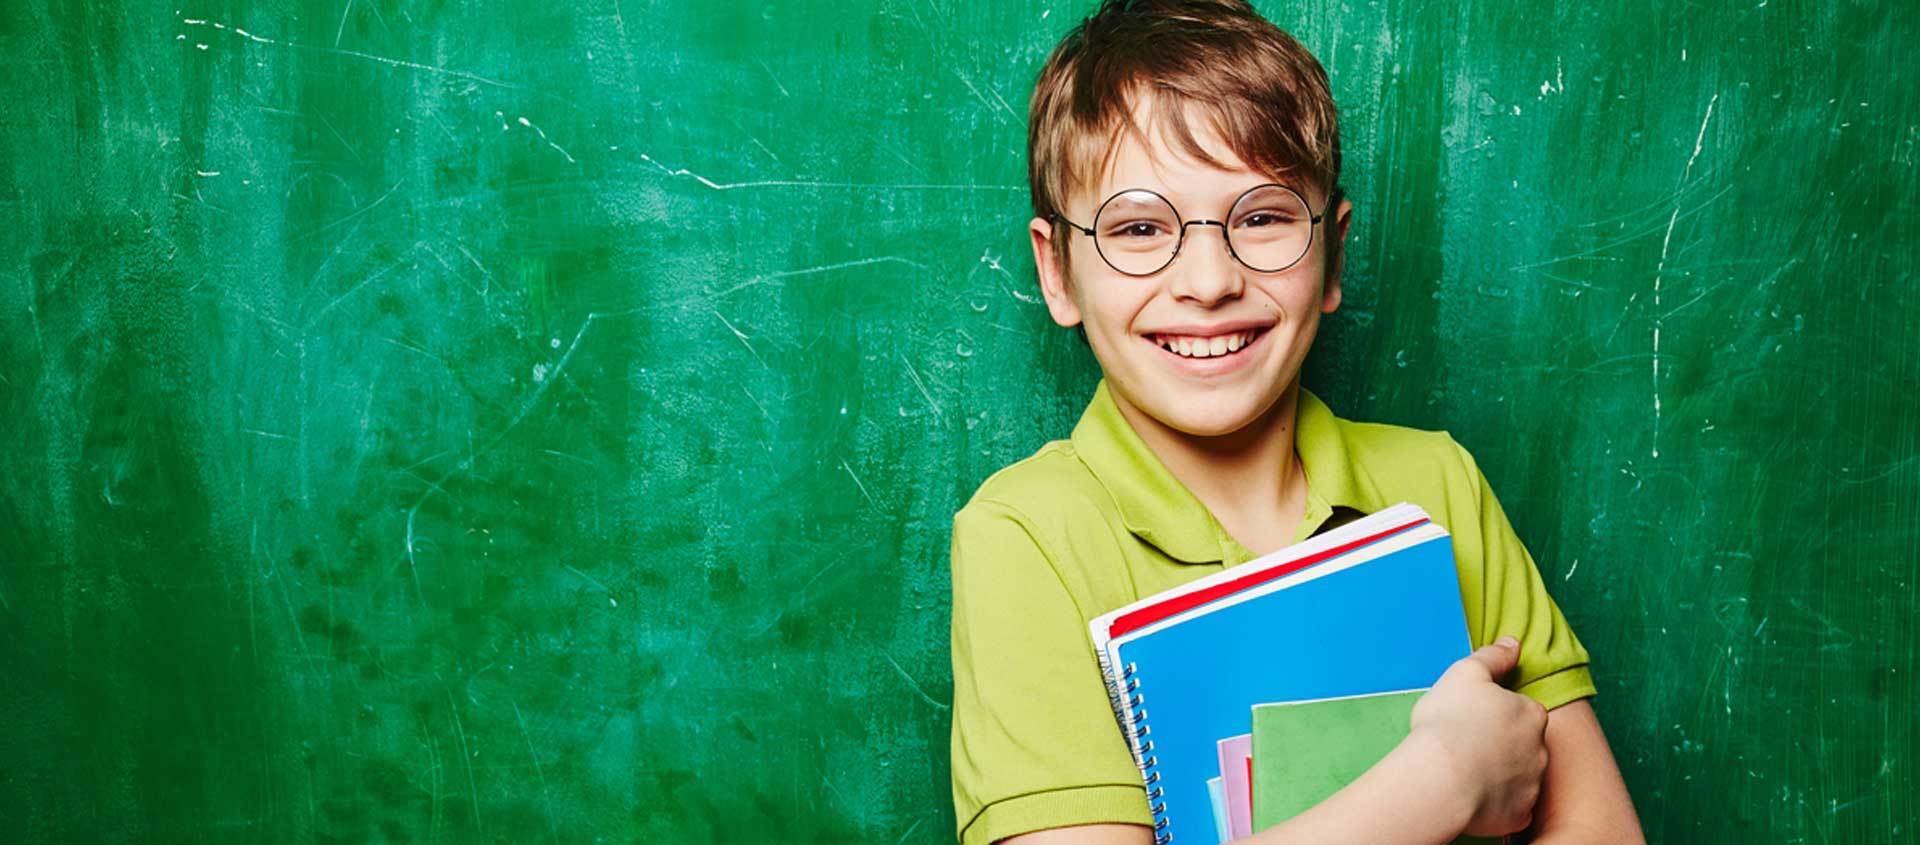 A Caucasian boy with glasses stands in front of a chalkboard, smiling